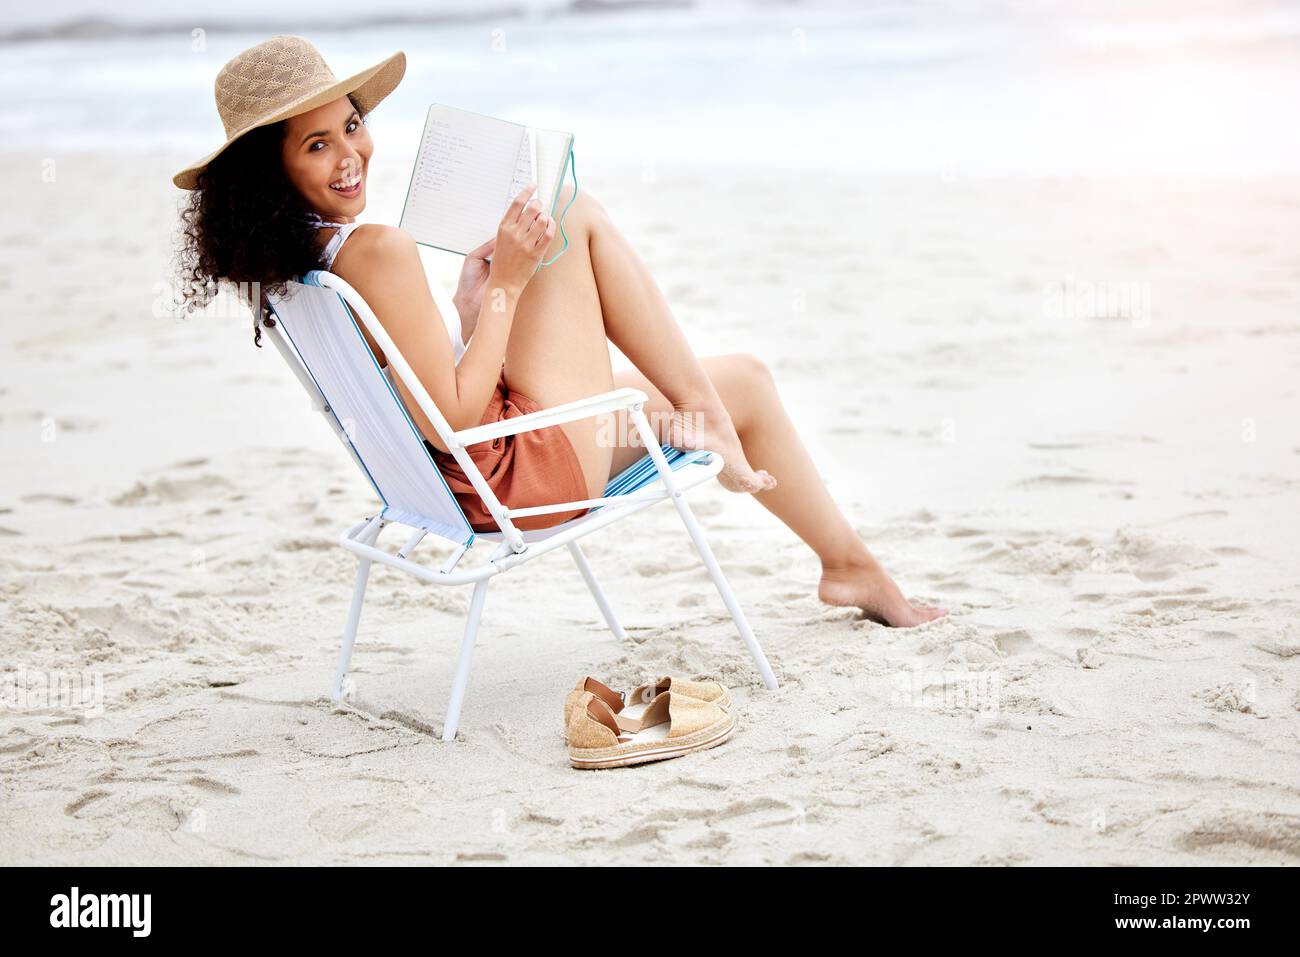 Young Model Girl Without Bra Relaxing With A Book On A Beach Near